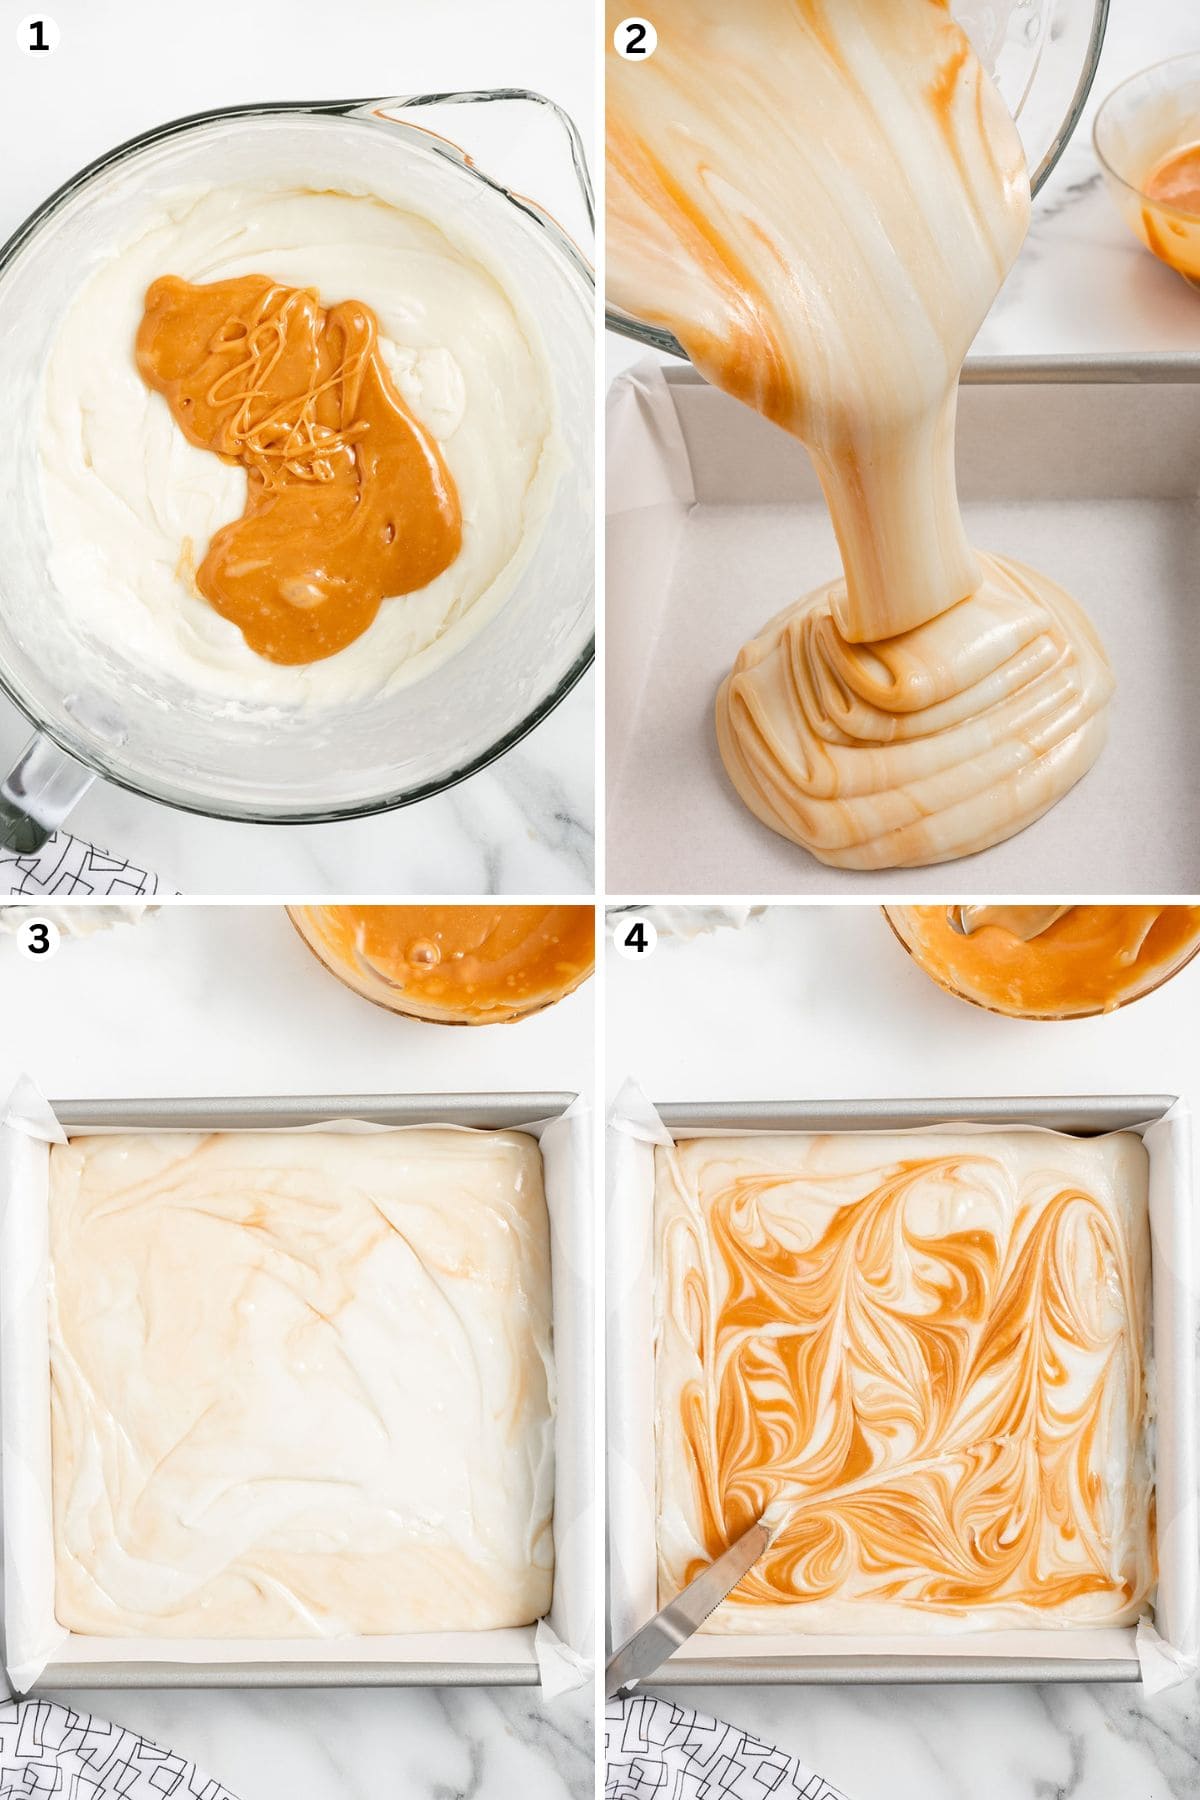 fudge mixture in a bowl. pour the mixture into baking dish. pour the caramel and swirl it around using a knife.